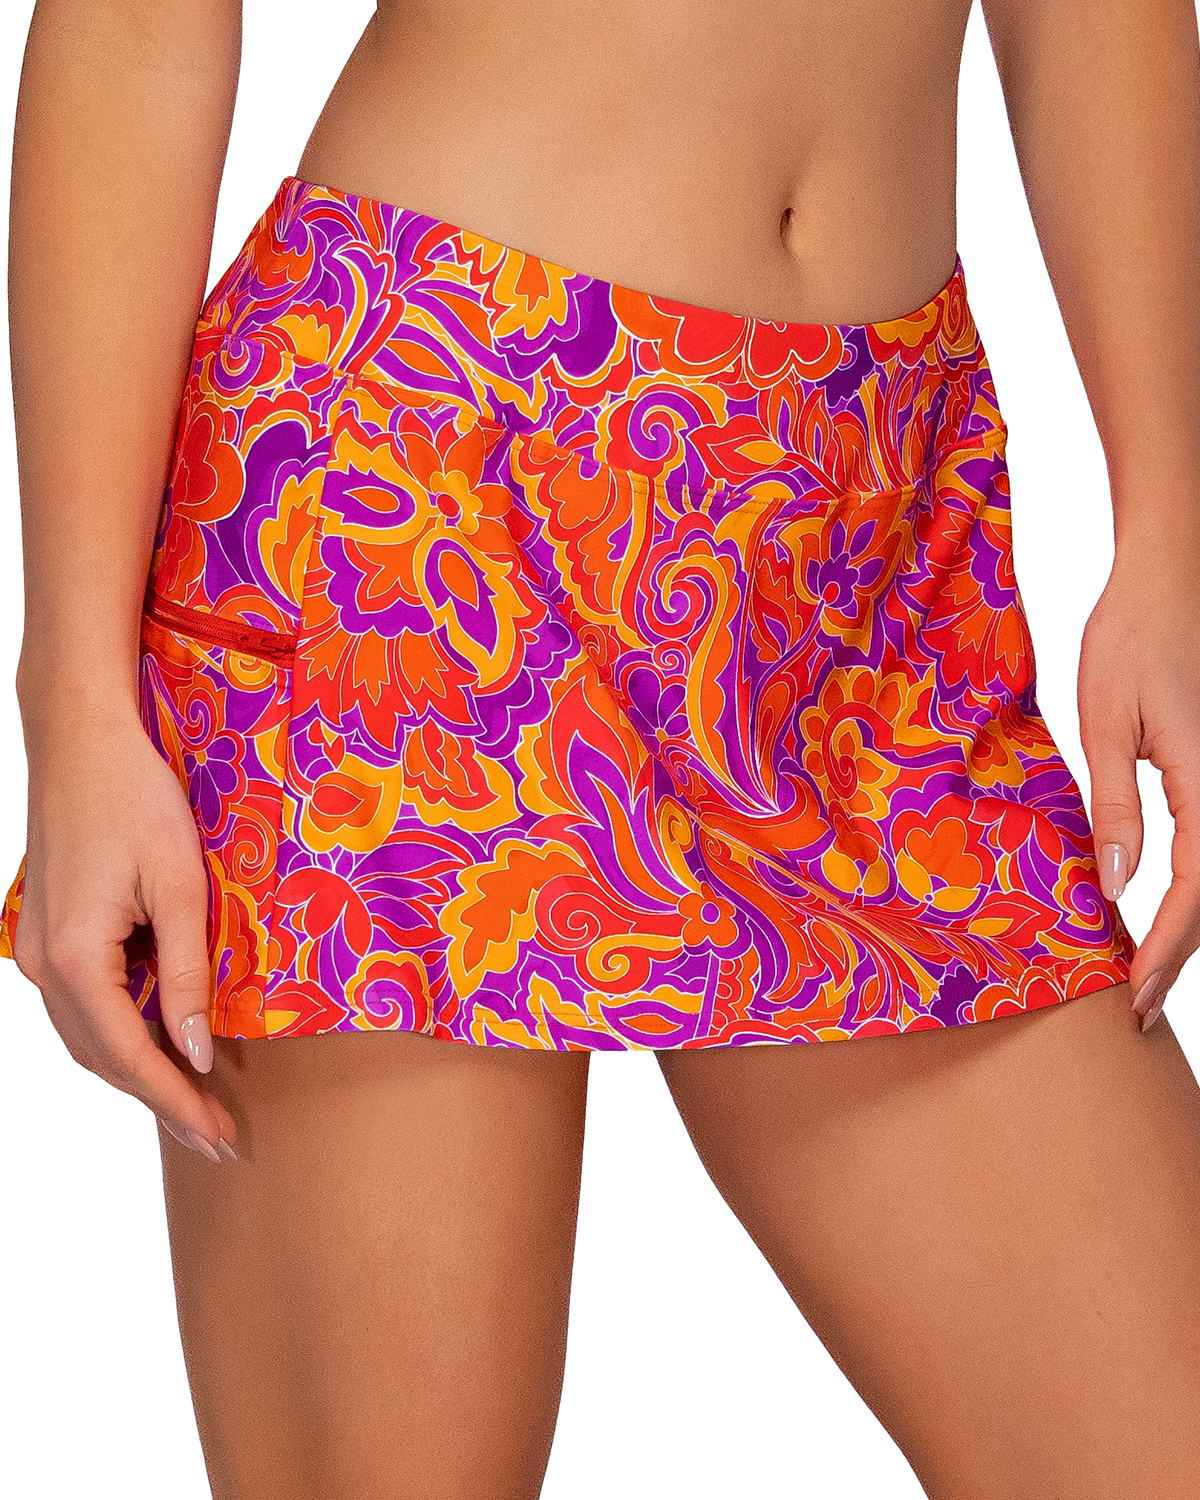 Model wearing a swim skirt with a side pocket and hidden shorts in a red, purple, orange and yellow paisley print